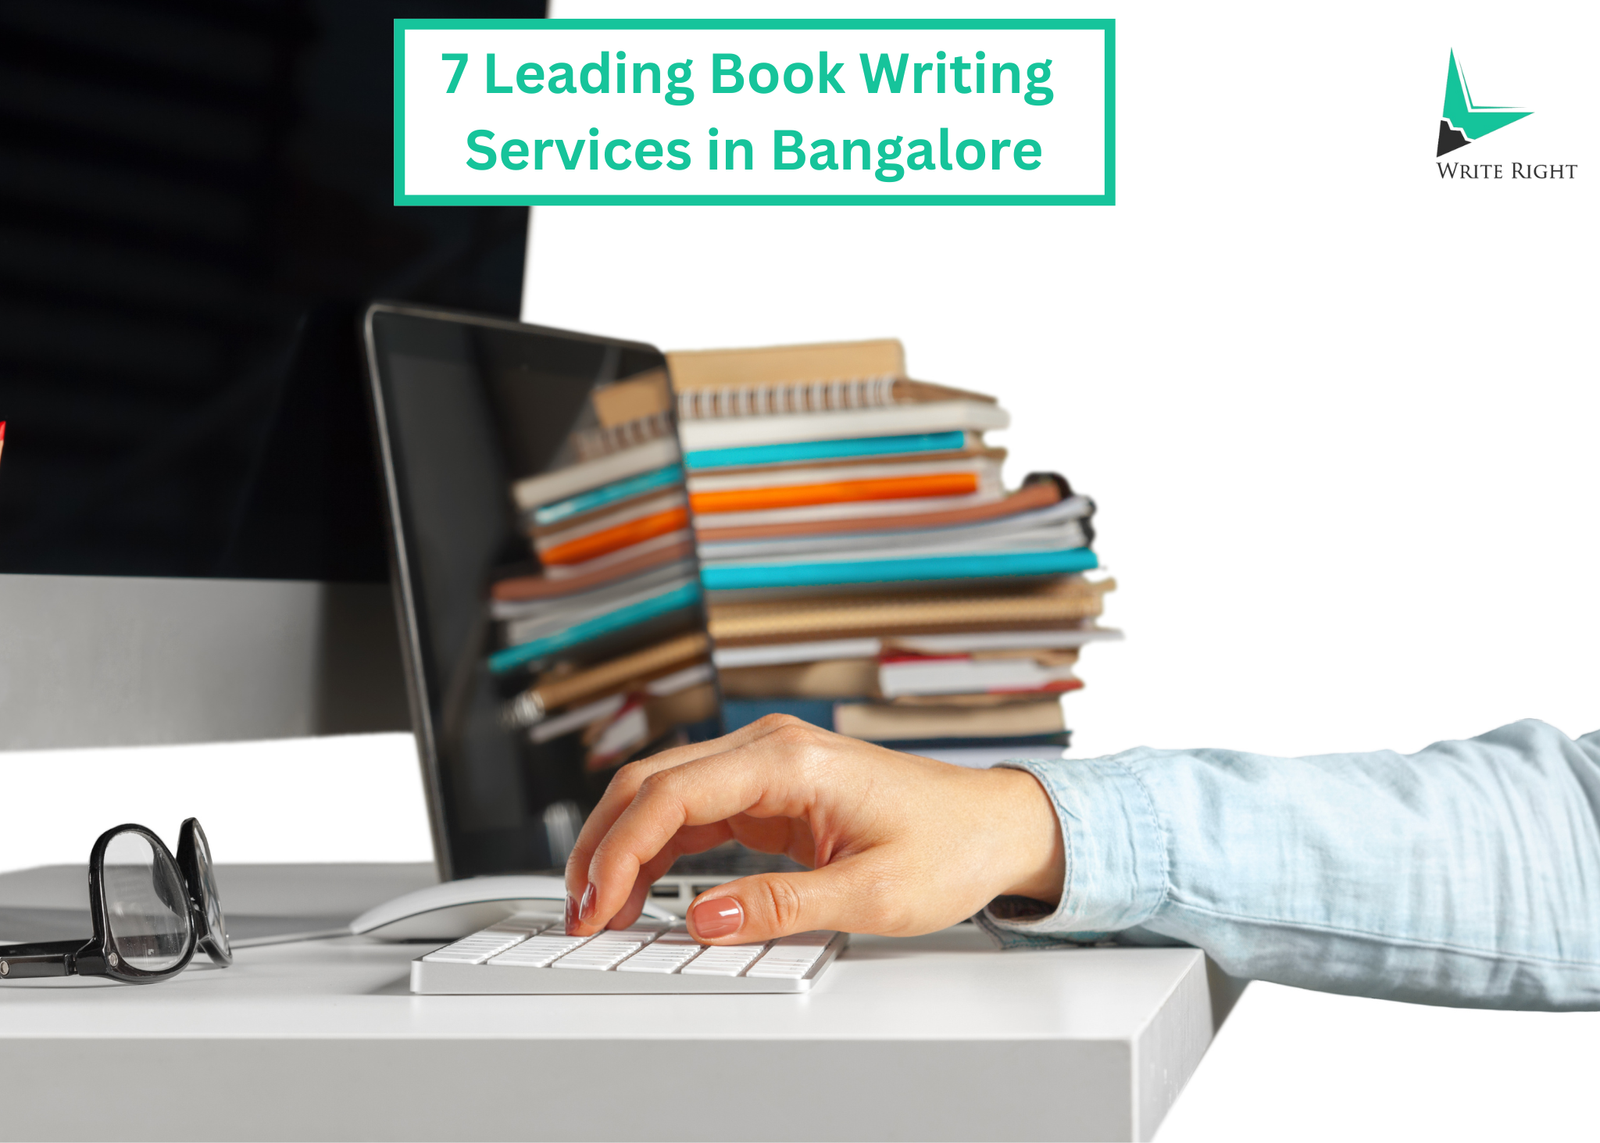 7 Leading Book Writing Services in Bangalore